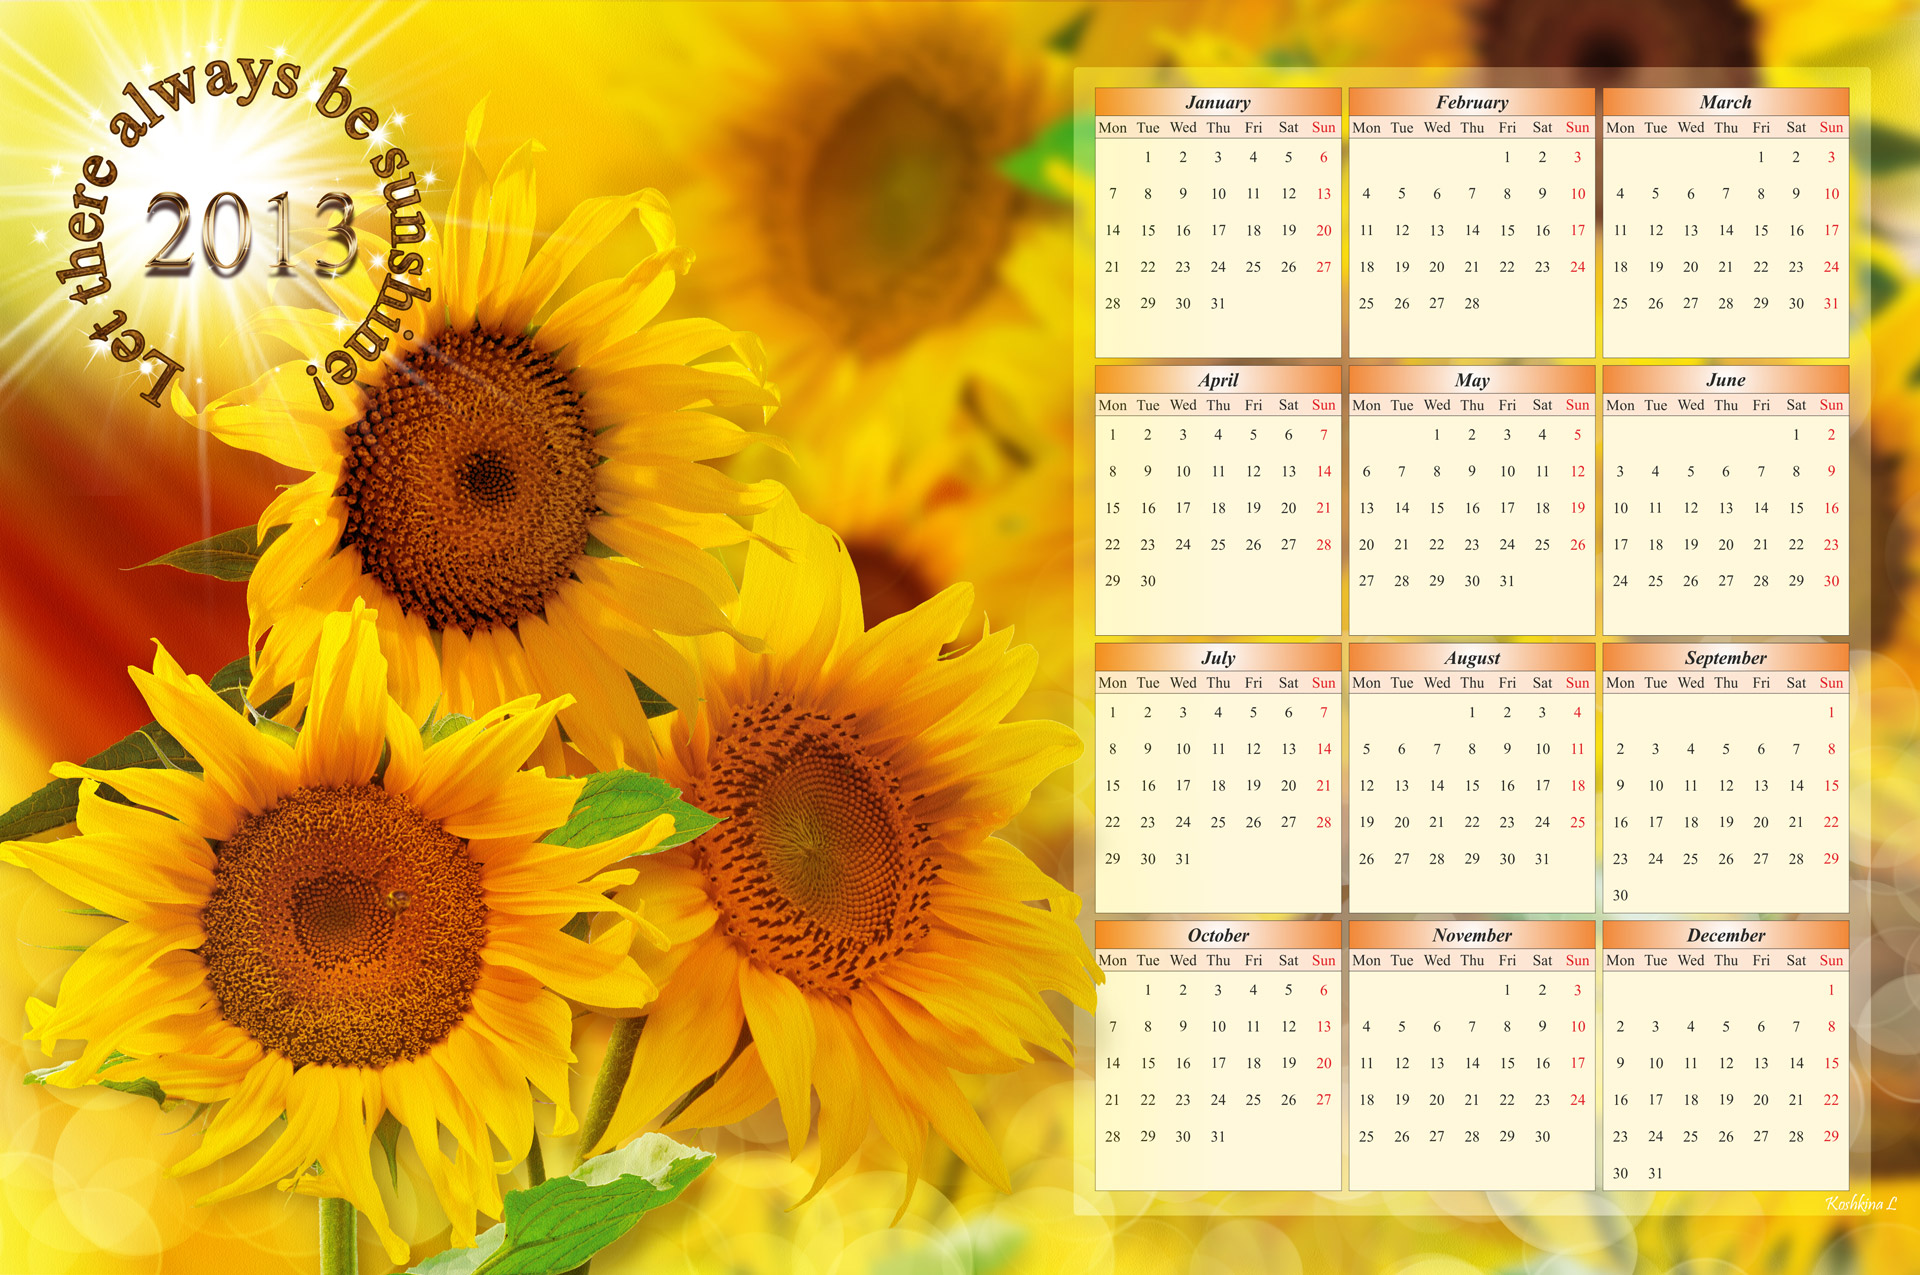 Calendar for 2013 with Sunflowers